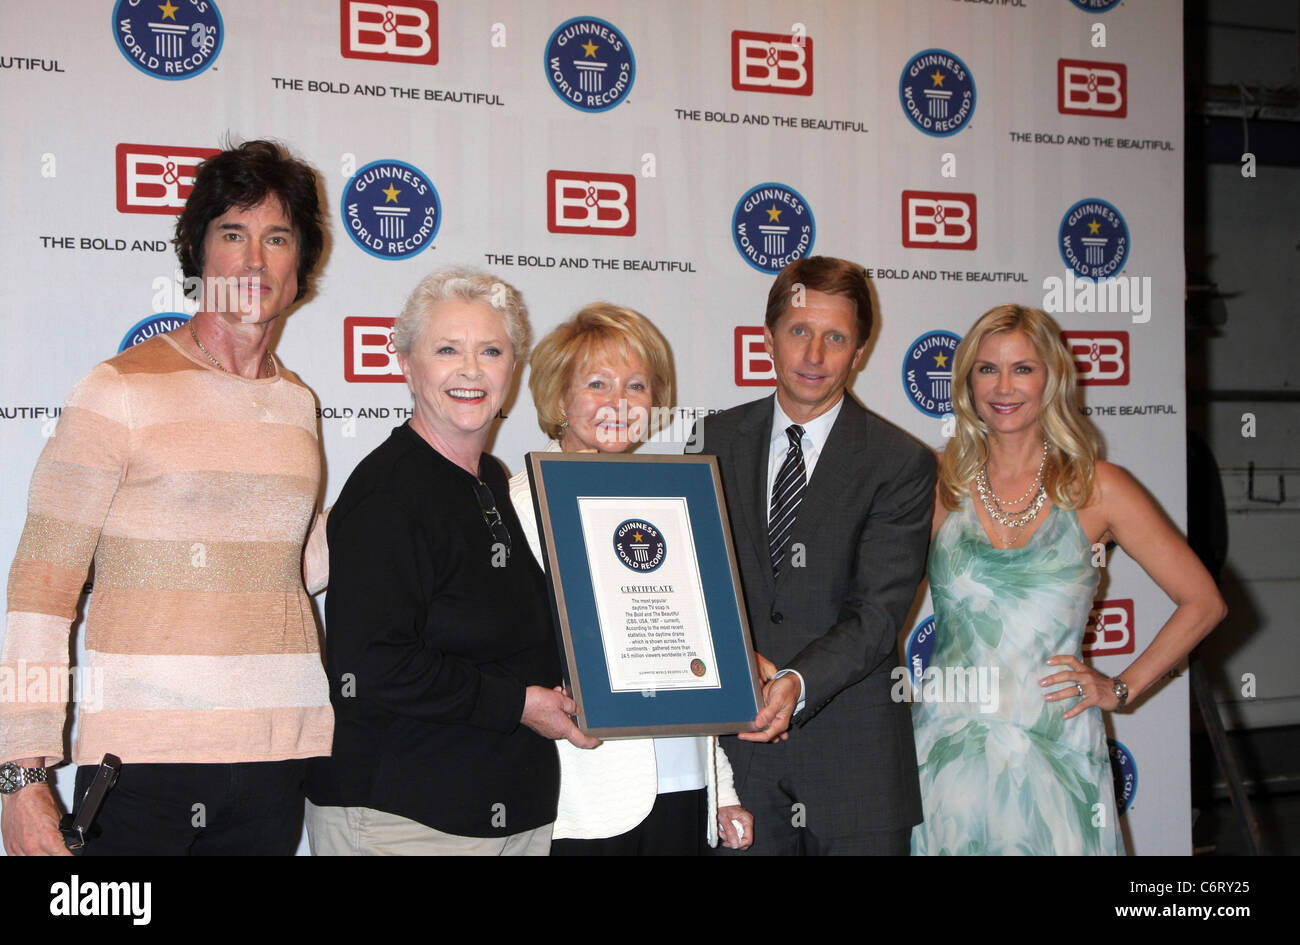 Ronn Moss, Susan Flannery, Lee Bell, Brad Bell, Katherine Kelly Lang Guinness World Records presents 'The Bold and the Stock Photo